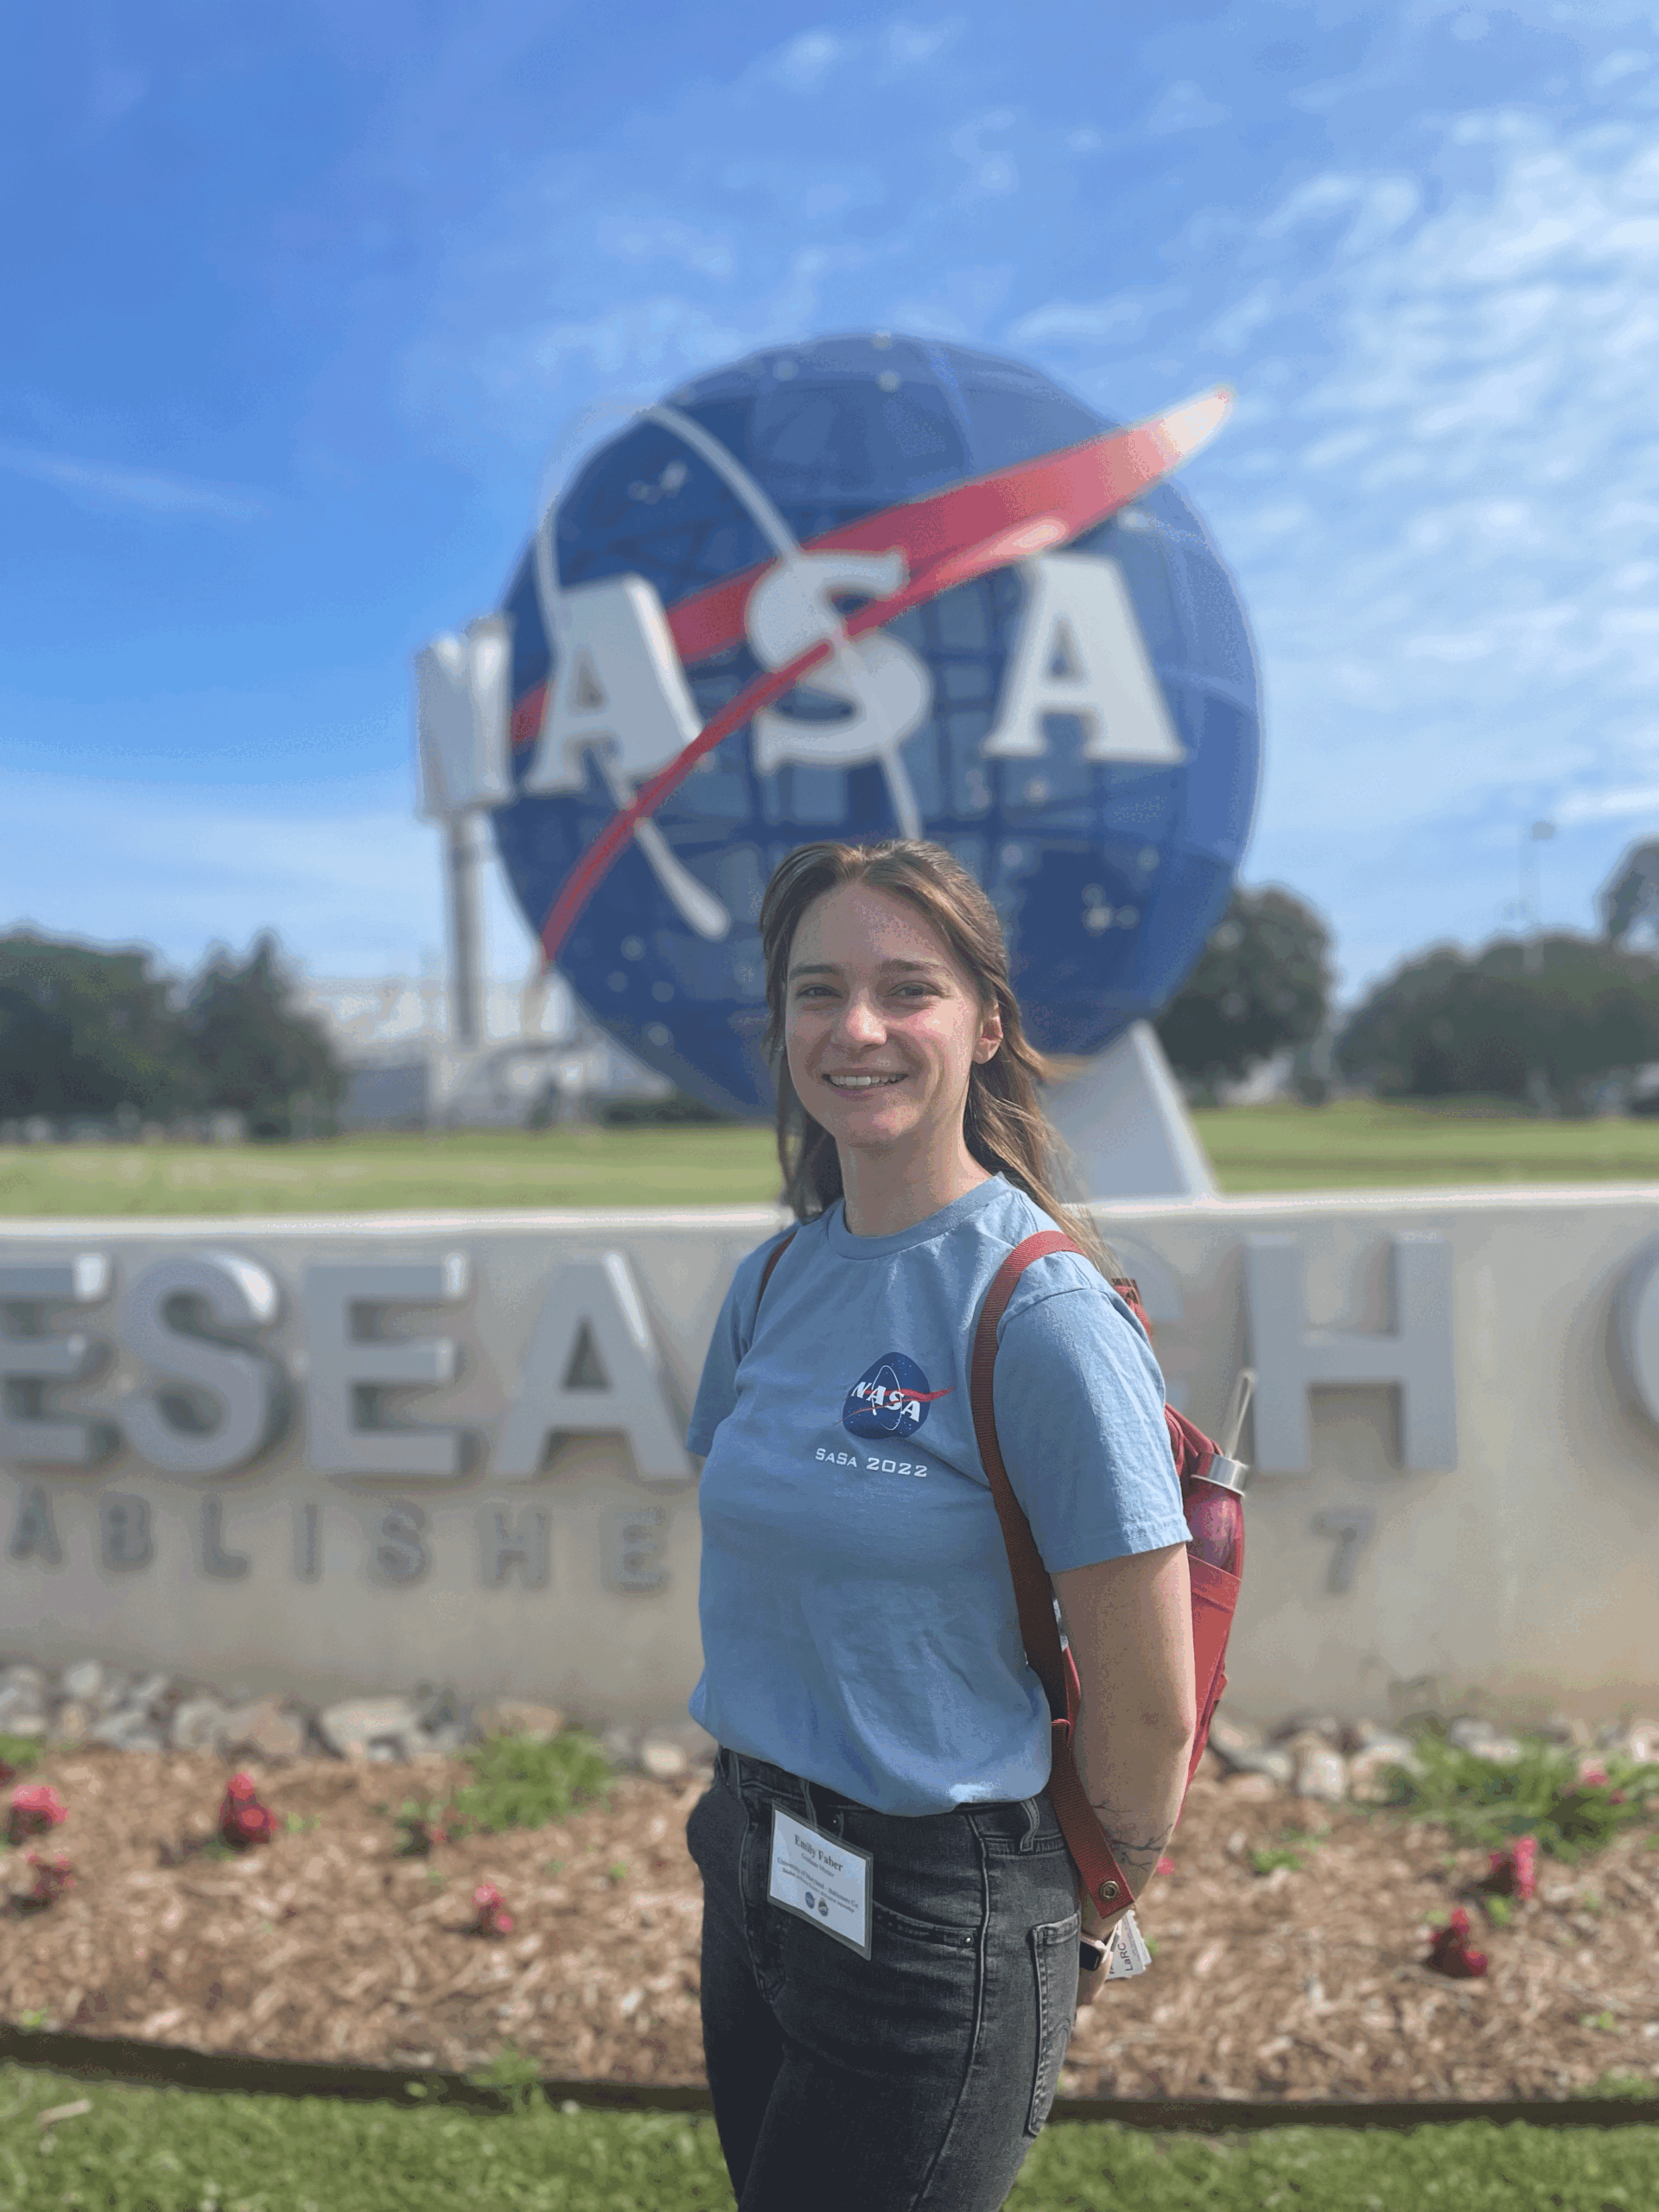 A woman stands in front of a large NASA sign.